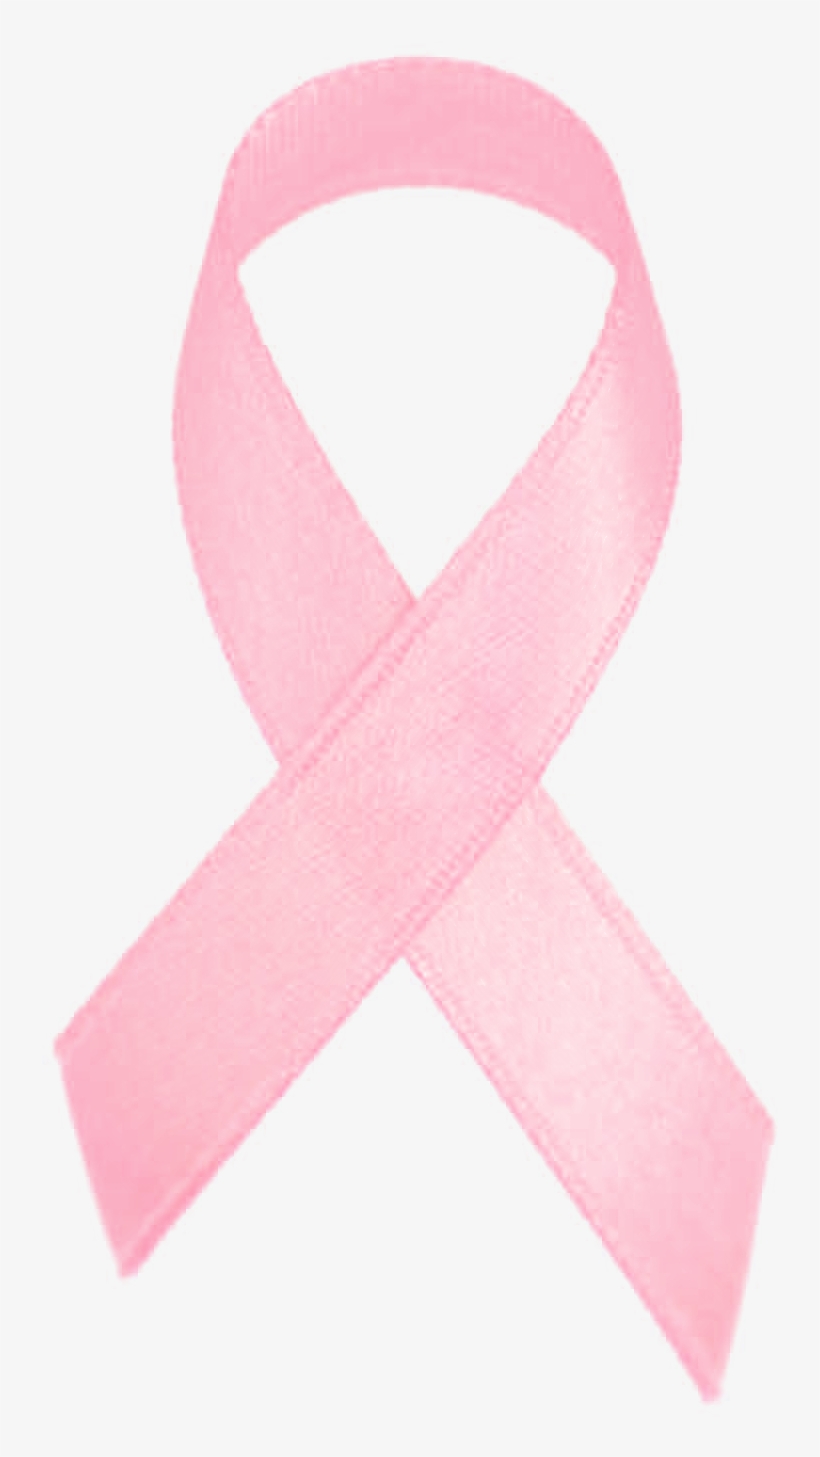 Wisdom And Birth 13 Awesome Evidence Based Reasons - Breast Cancer, transparent png #7591690